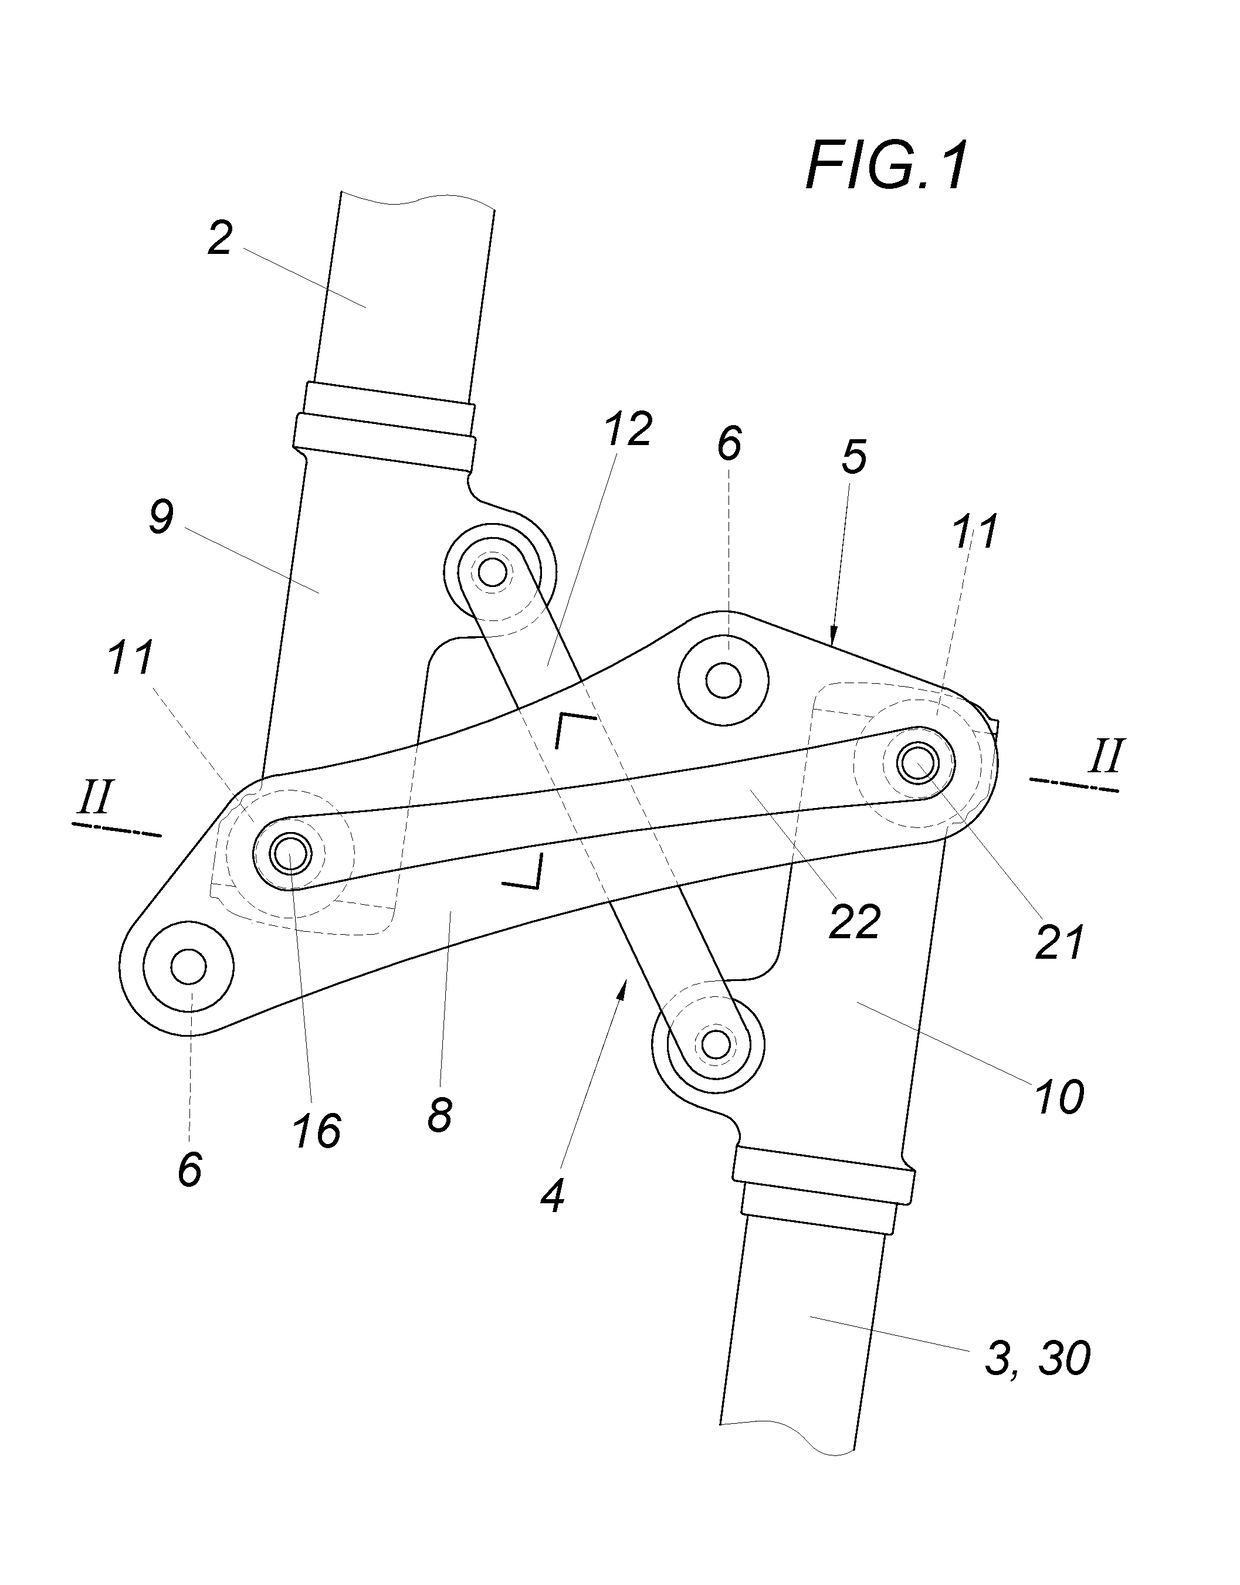 Apparatus for rowing in the direction the rower is facing